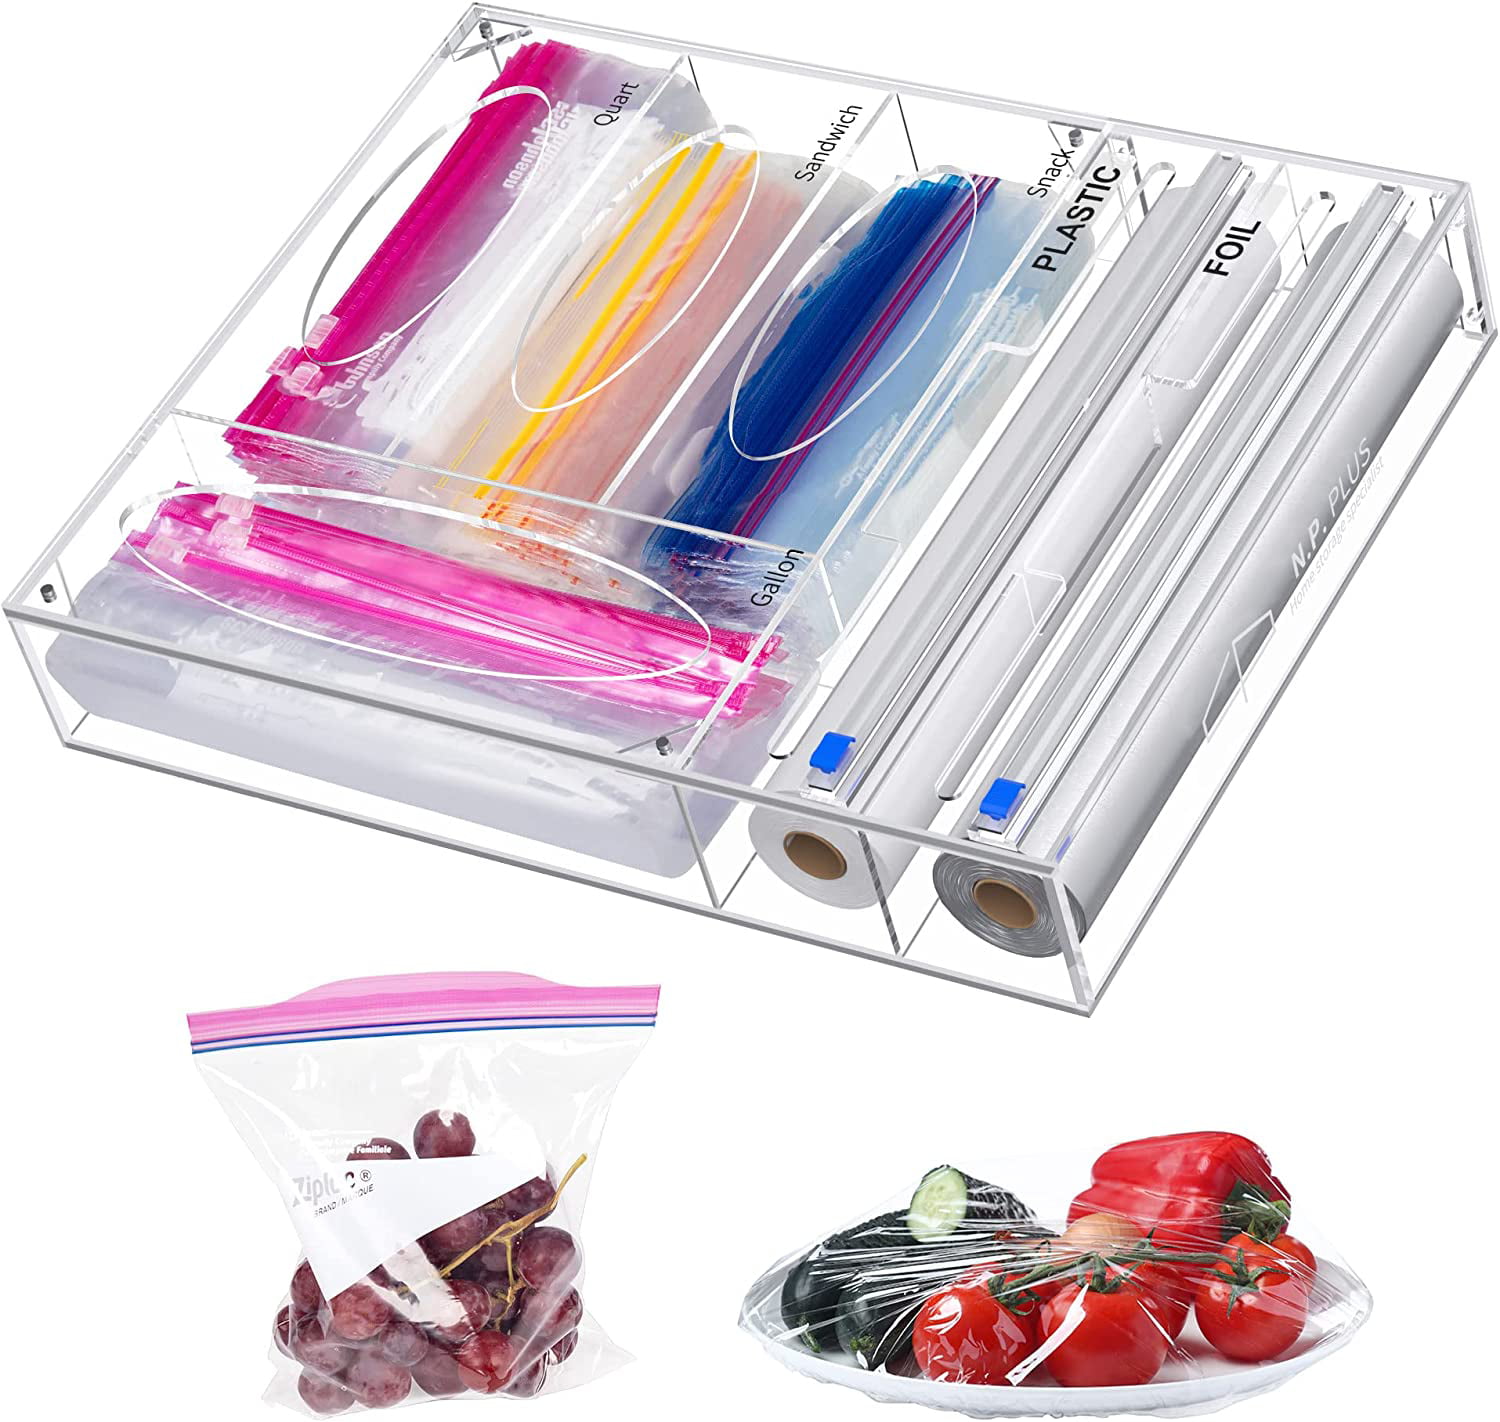 6-in-1 Expandable Ziplock Bag, Foil and Wrap Organizer with Side